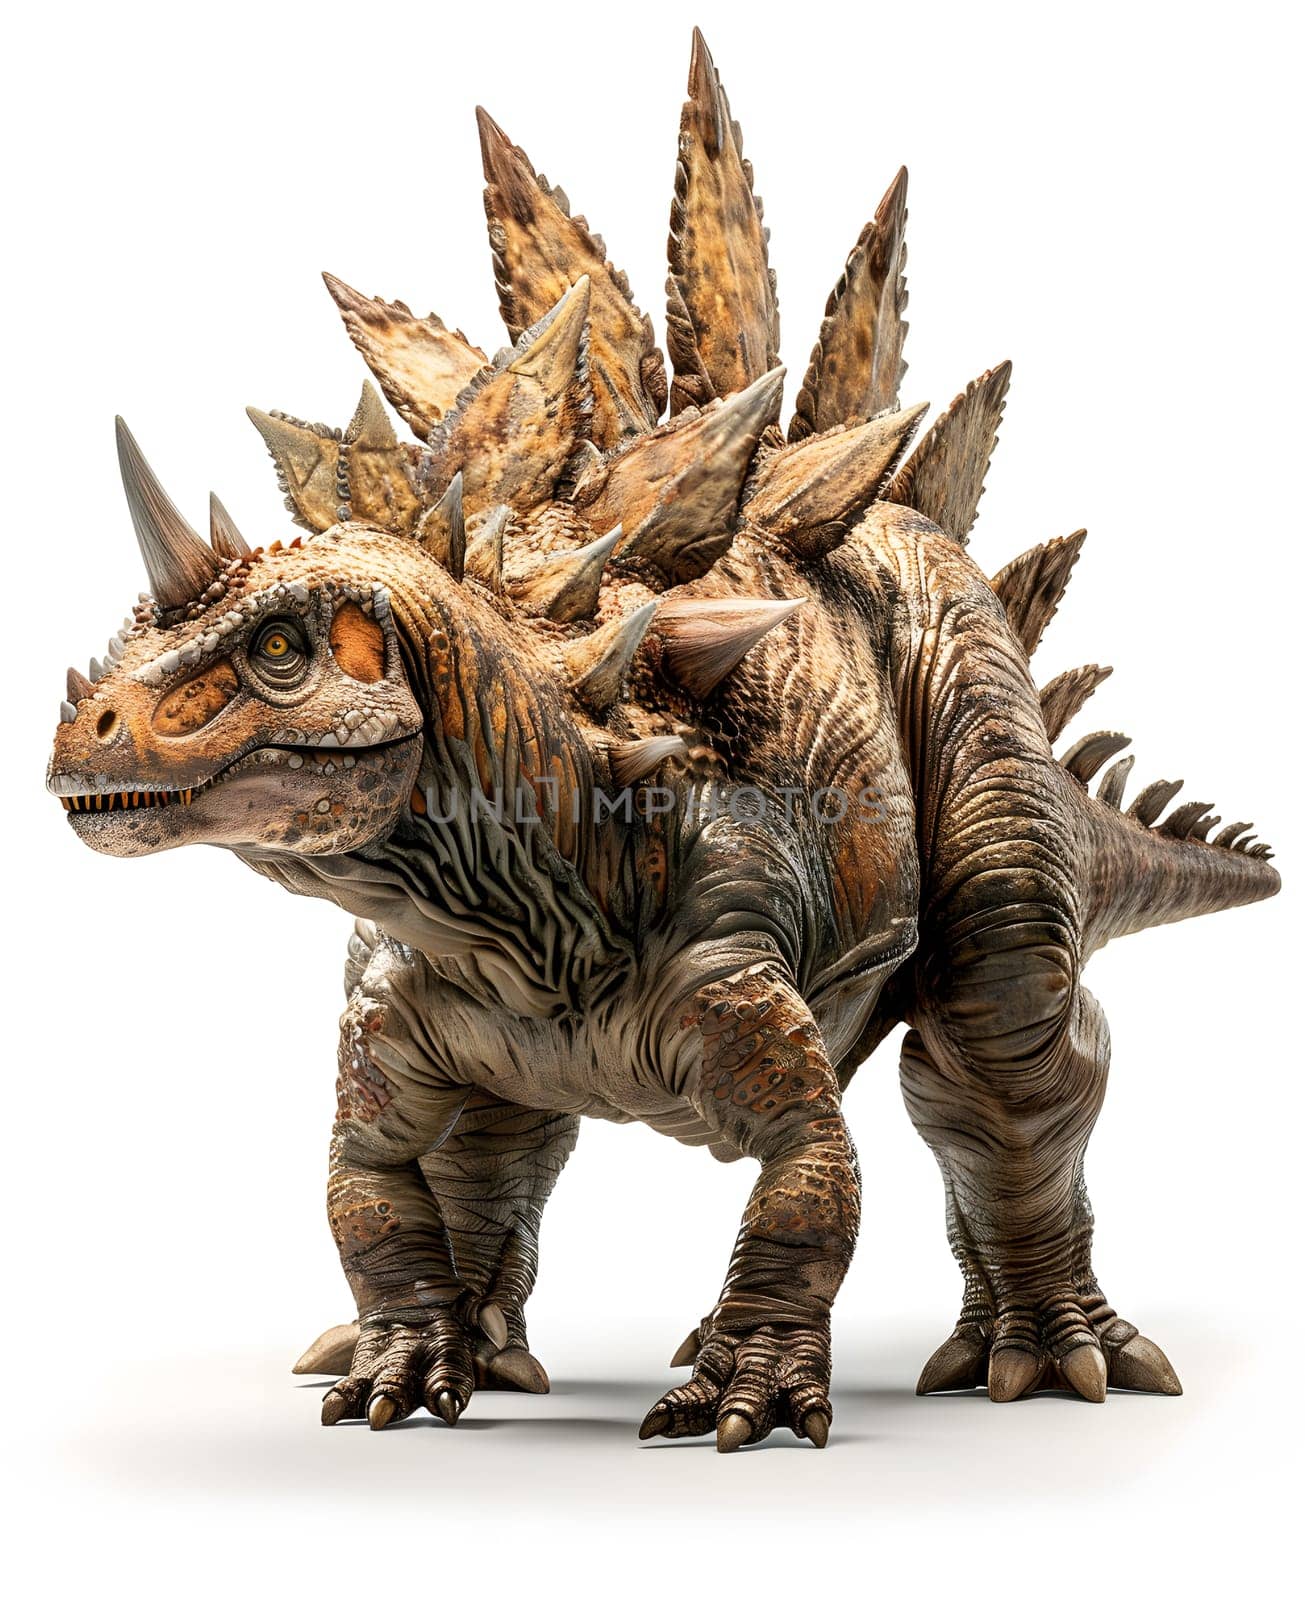 An animal figure of a horned dinosaur, resembling an Ankylosaurus, made of wood and depicted in art form. The toy stands on a white background, symbolizing the terrestrial animals extinction